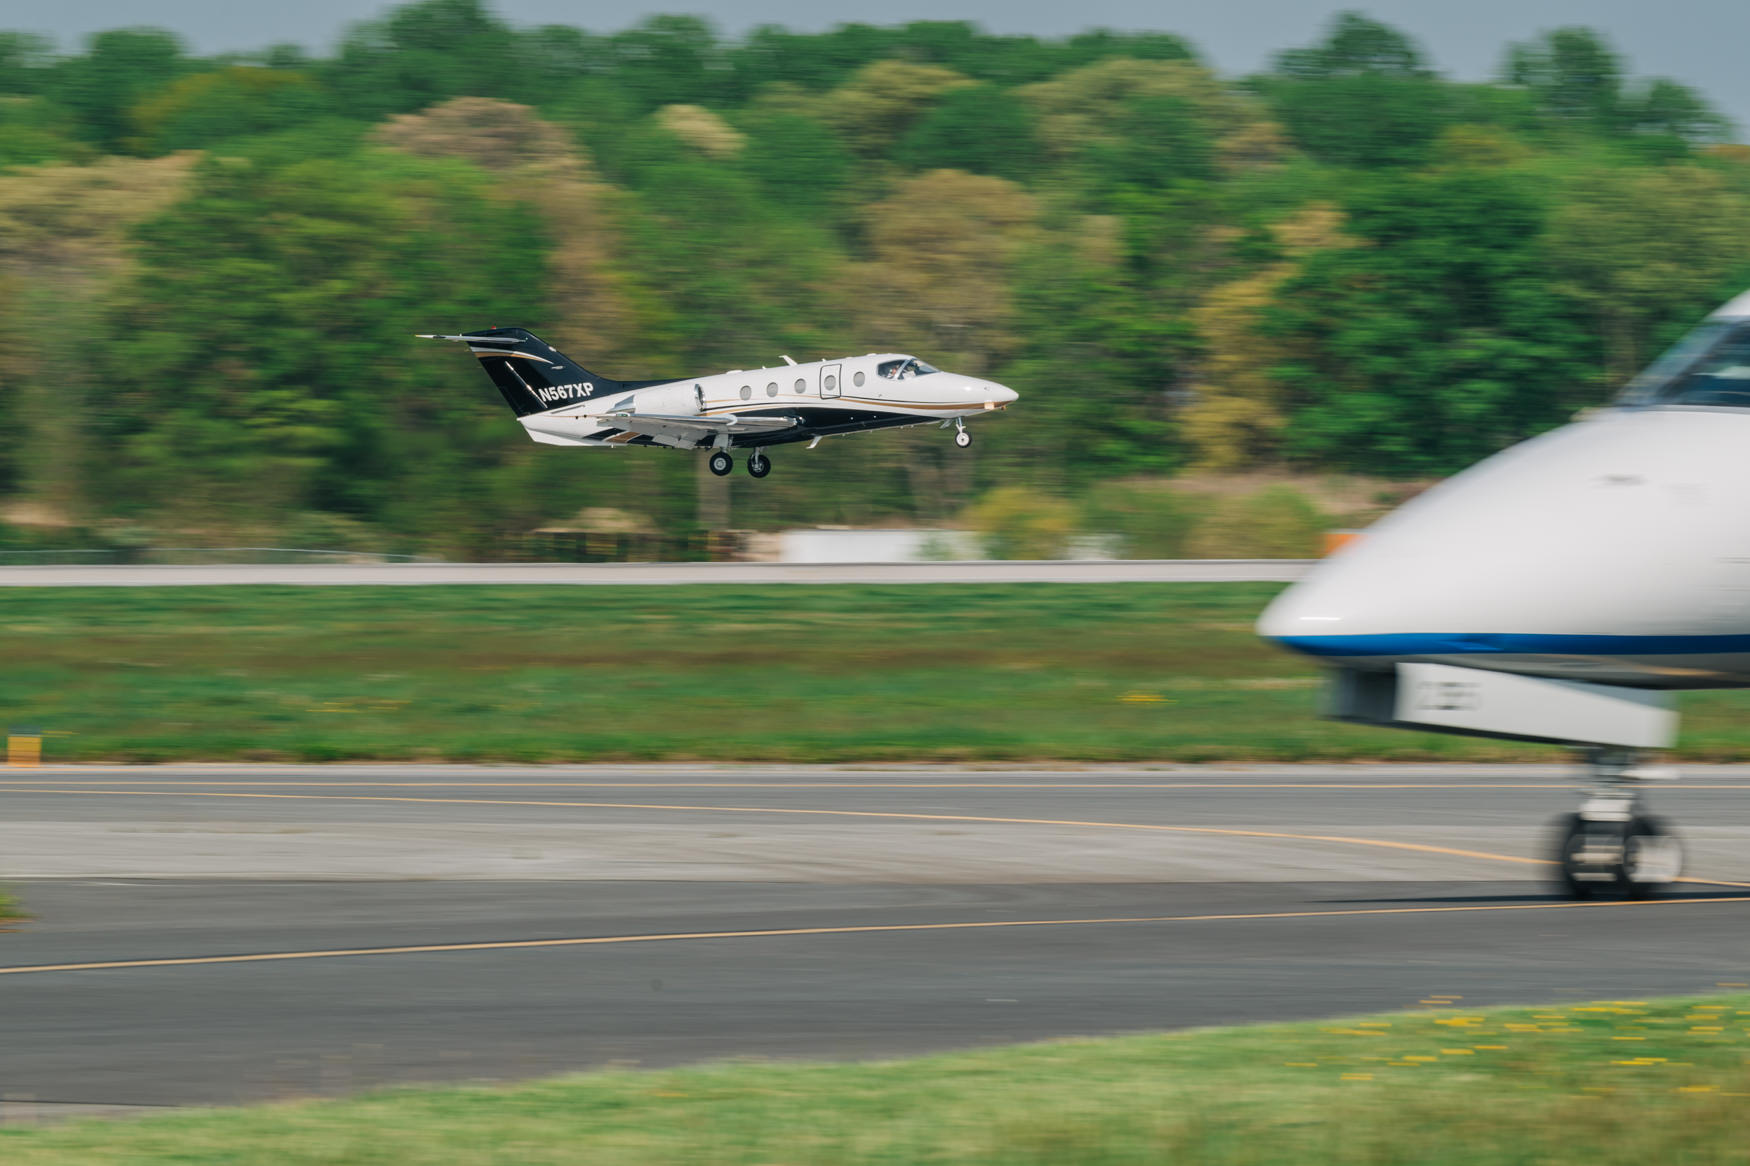 Jets take off and taxi at Civil Air Terminal CAT at Dover Air Force Base